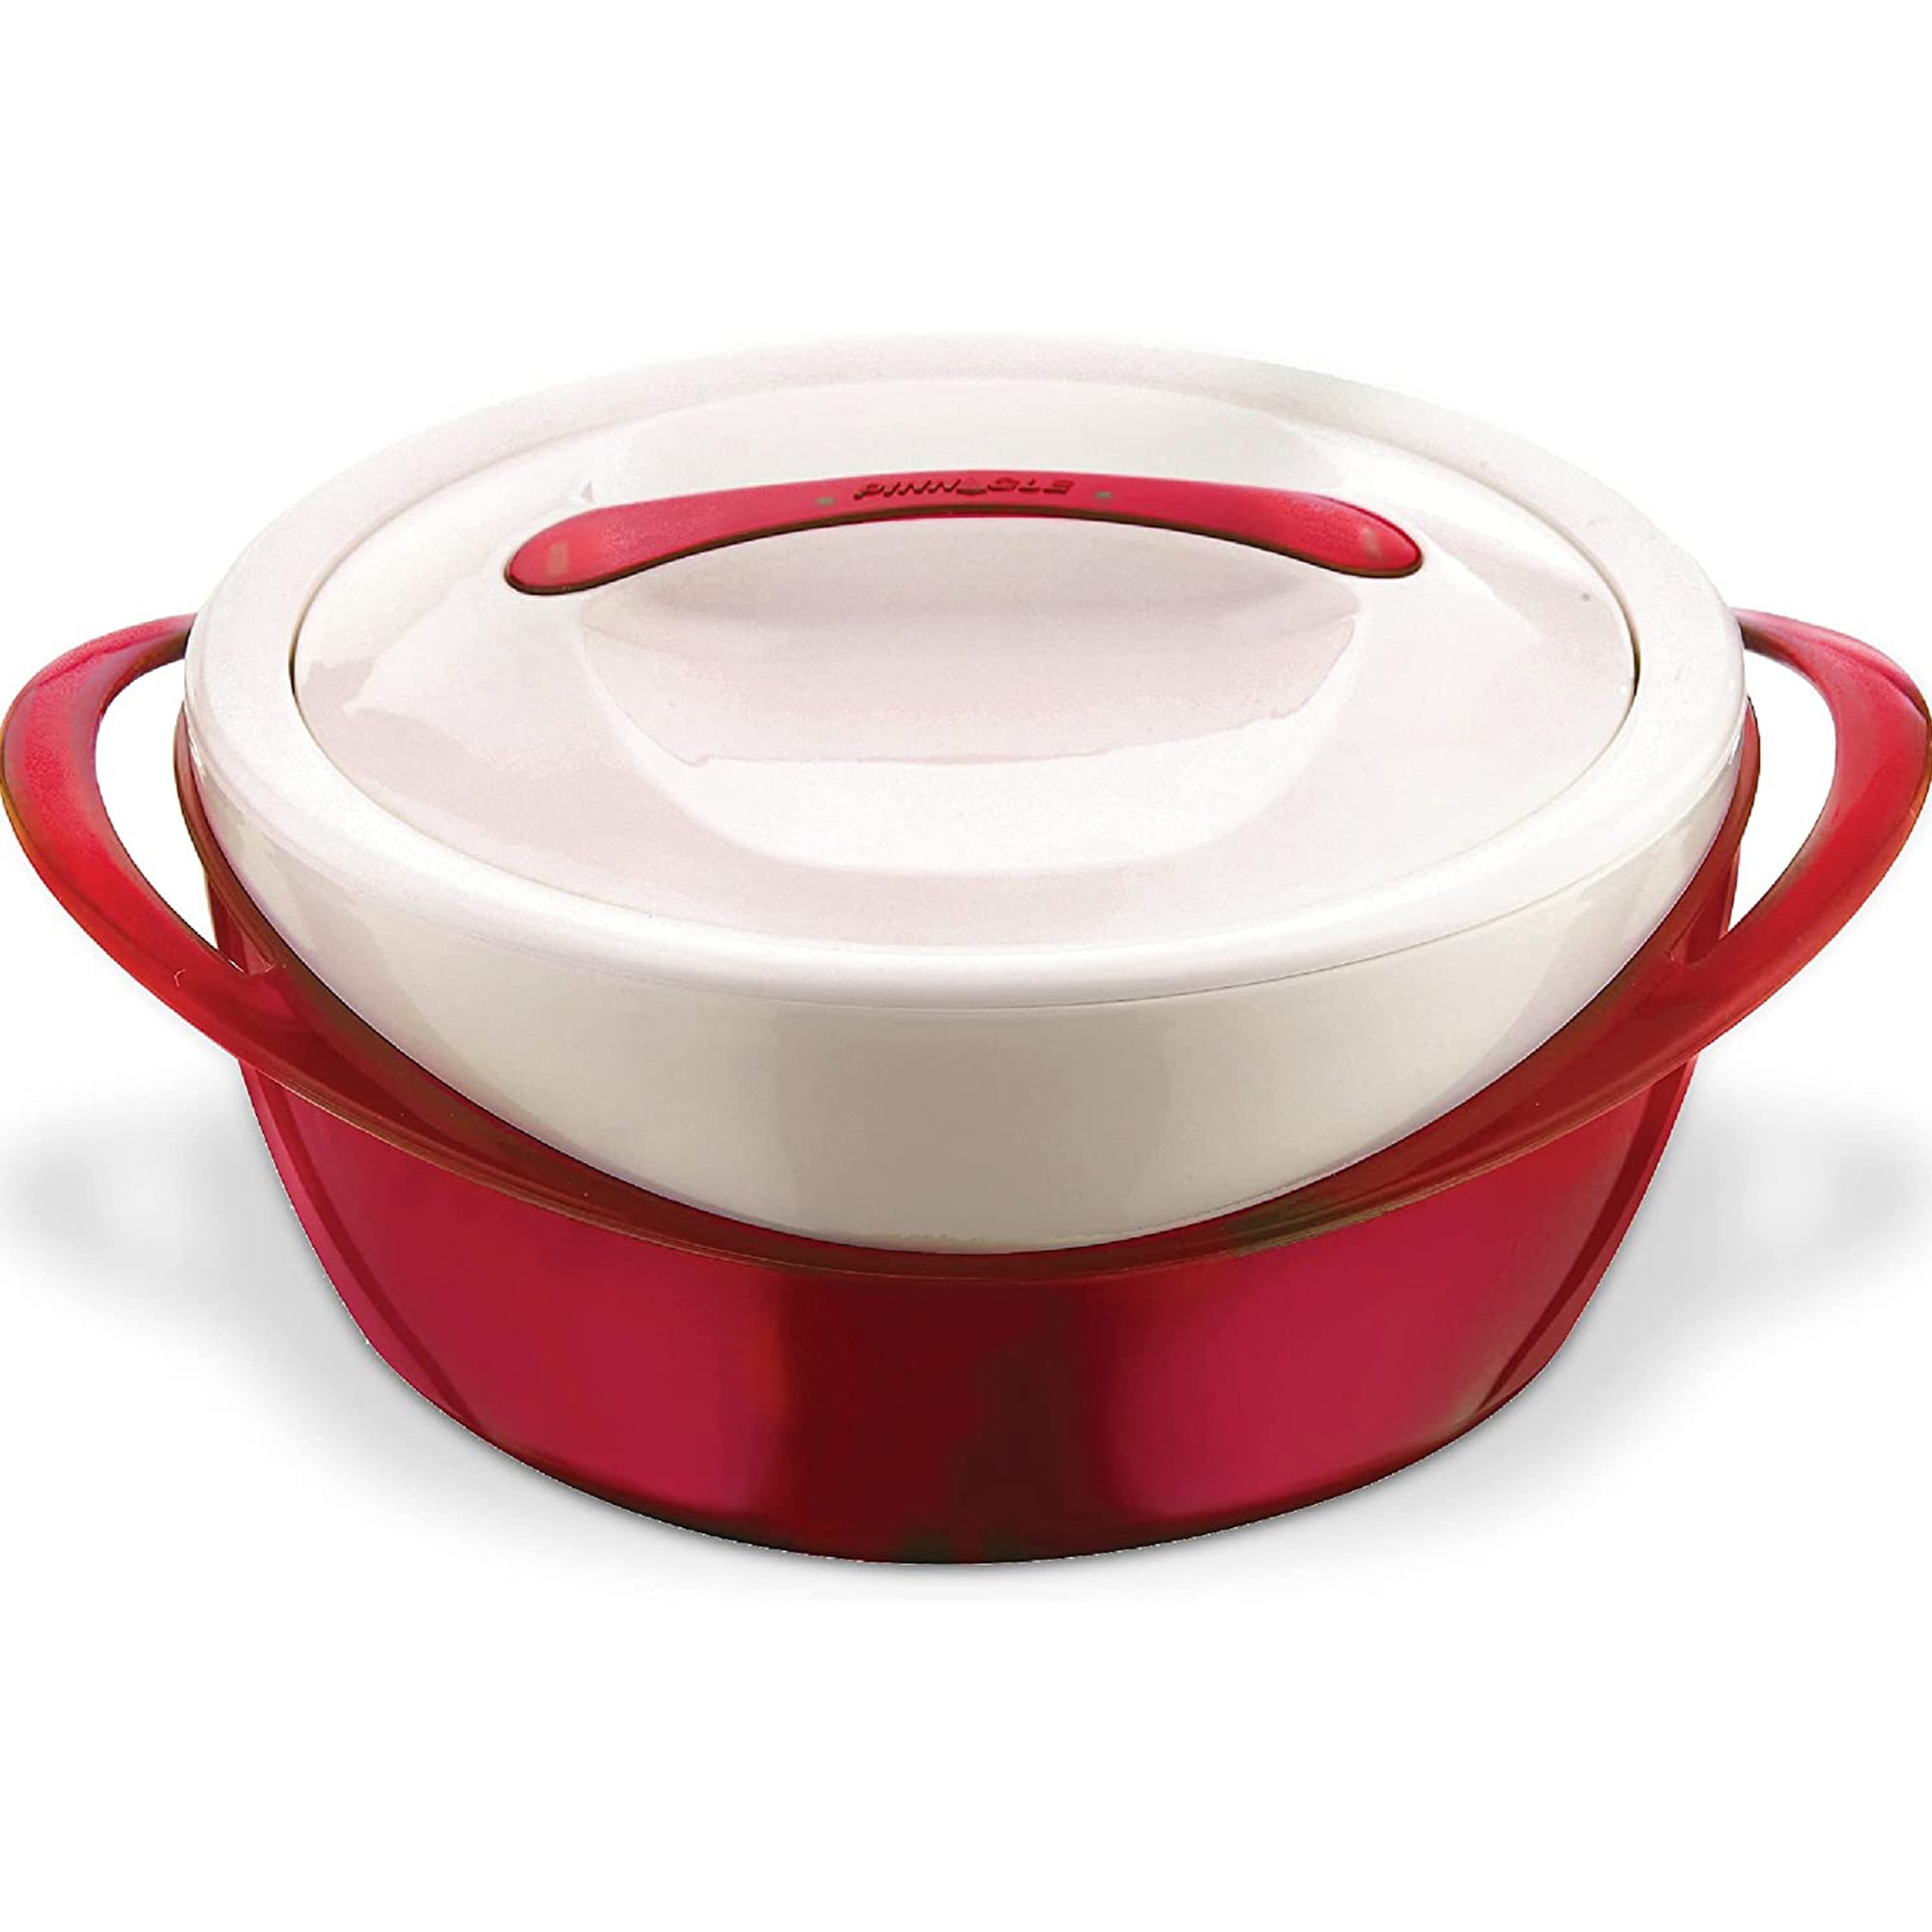 Pinnacle Insulated Casserole Dish with Lid 1.5 qt. Hot Pot Food  Warmer/Cooler –Great Thermal Soup/Salad Serving Bowl- Stainless Steel Hot  Food